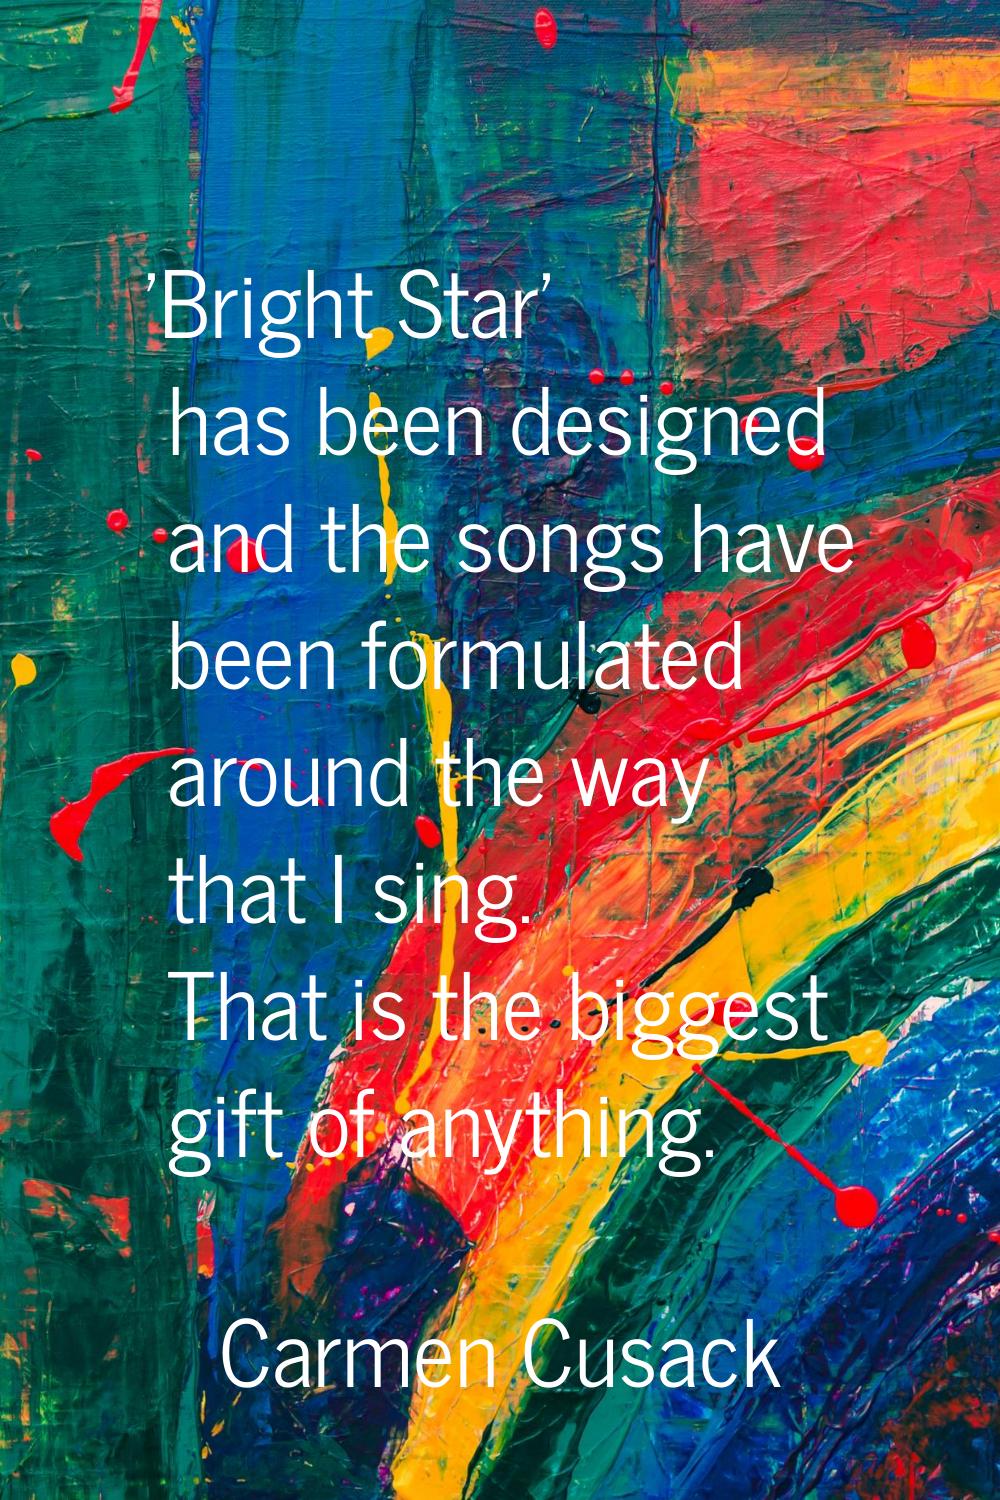 'Bright Star' has been designed and the songs have been formulated around the way that I sing. That